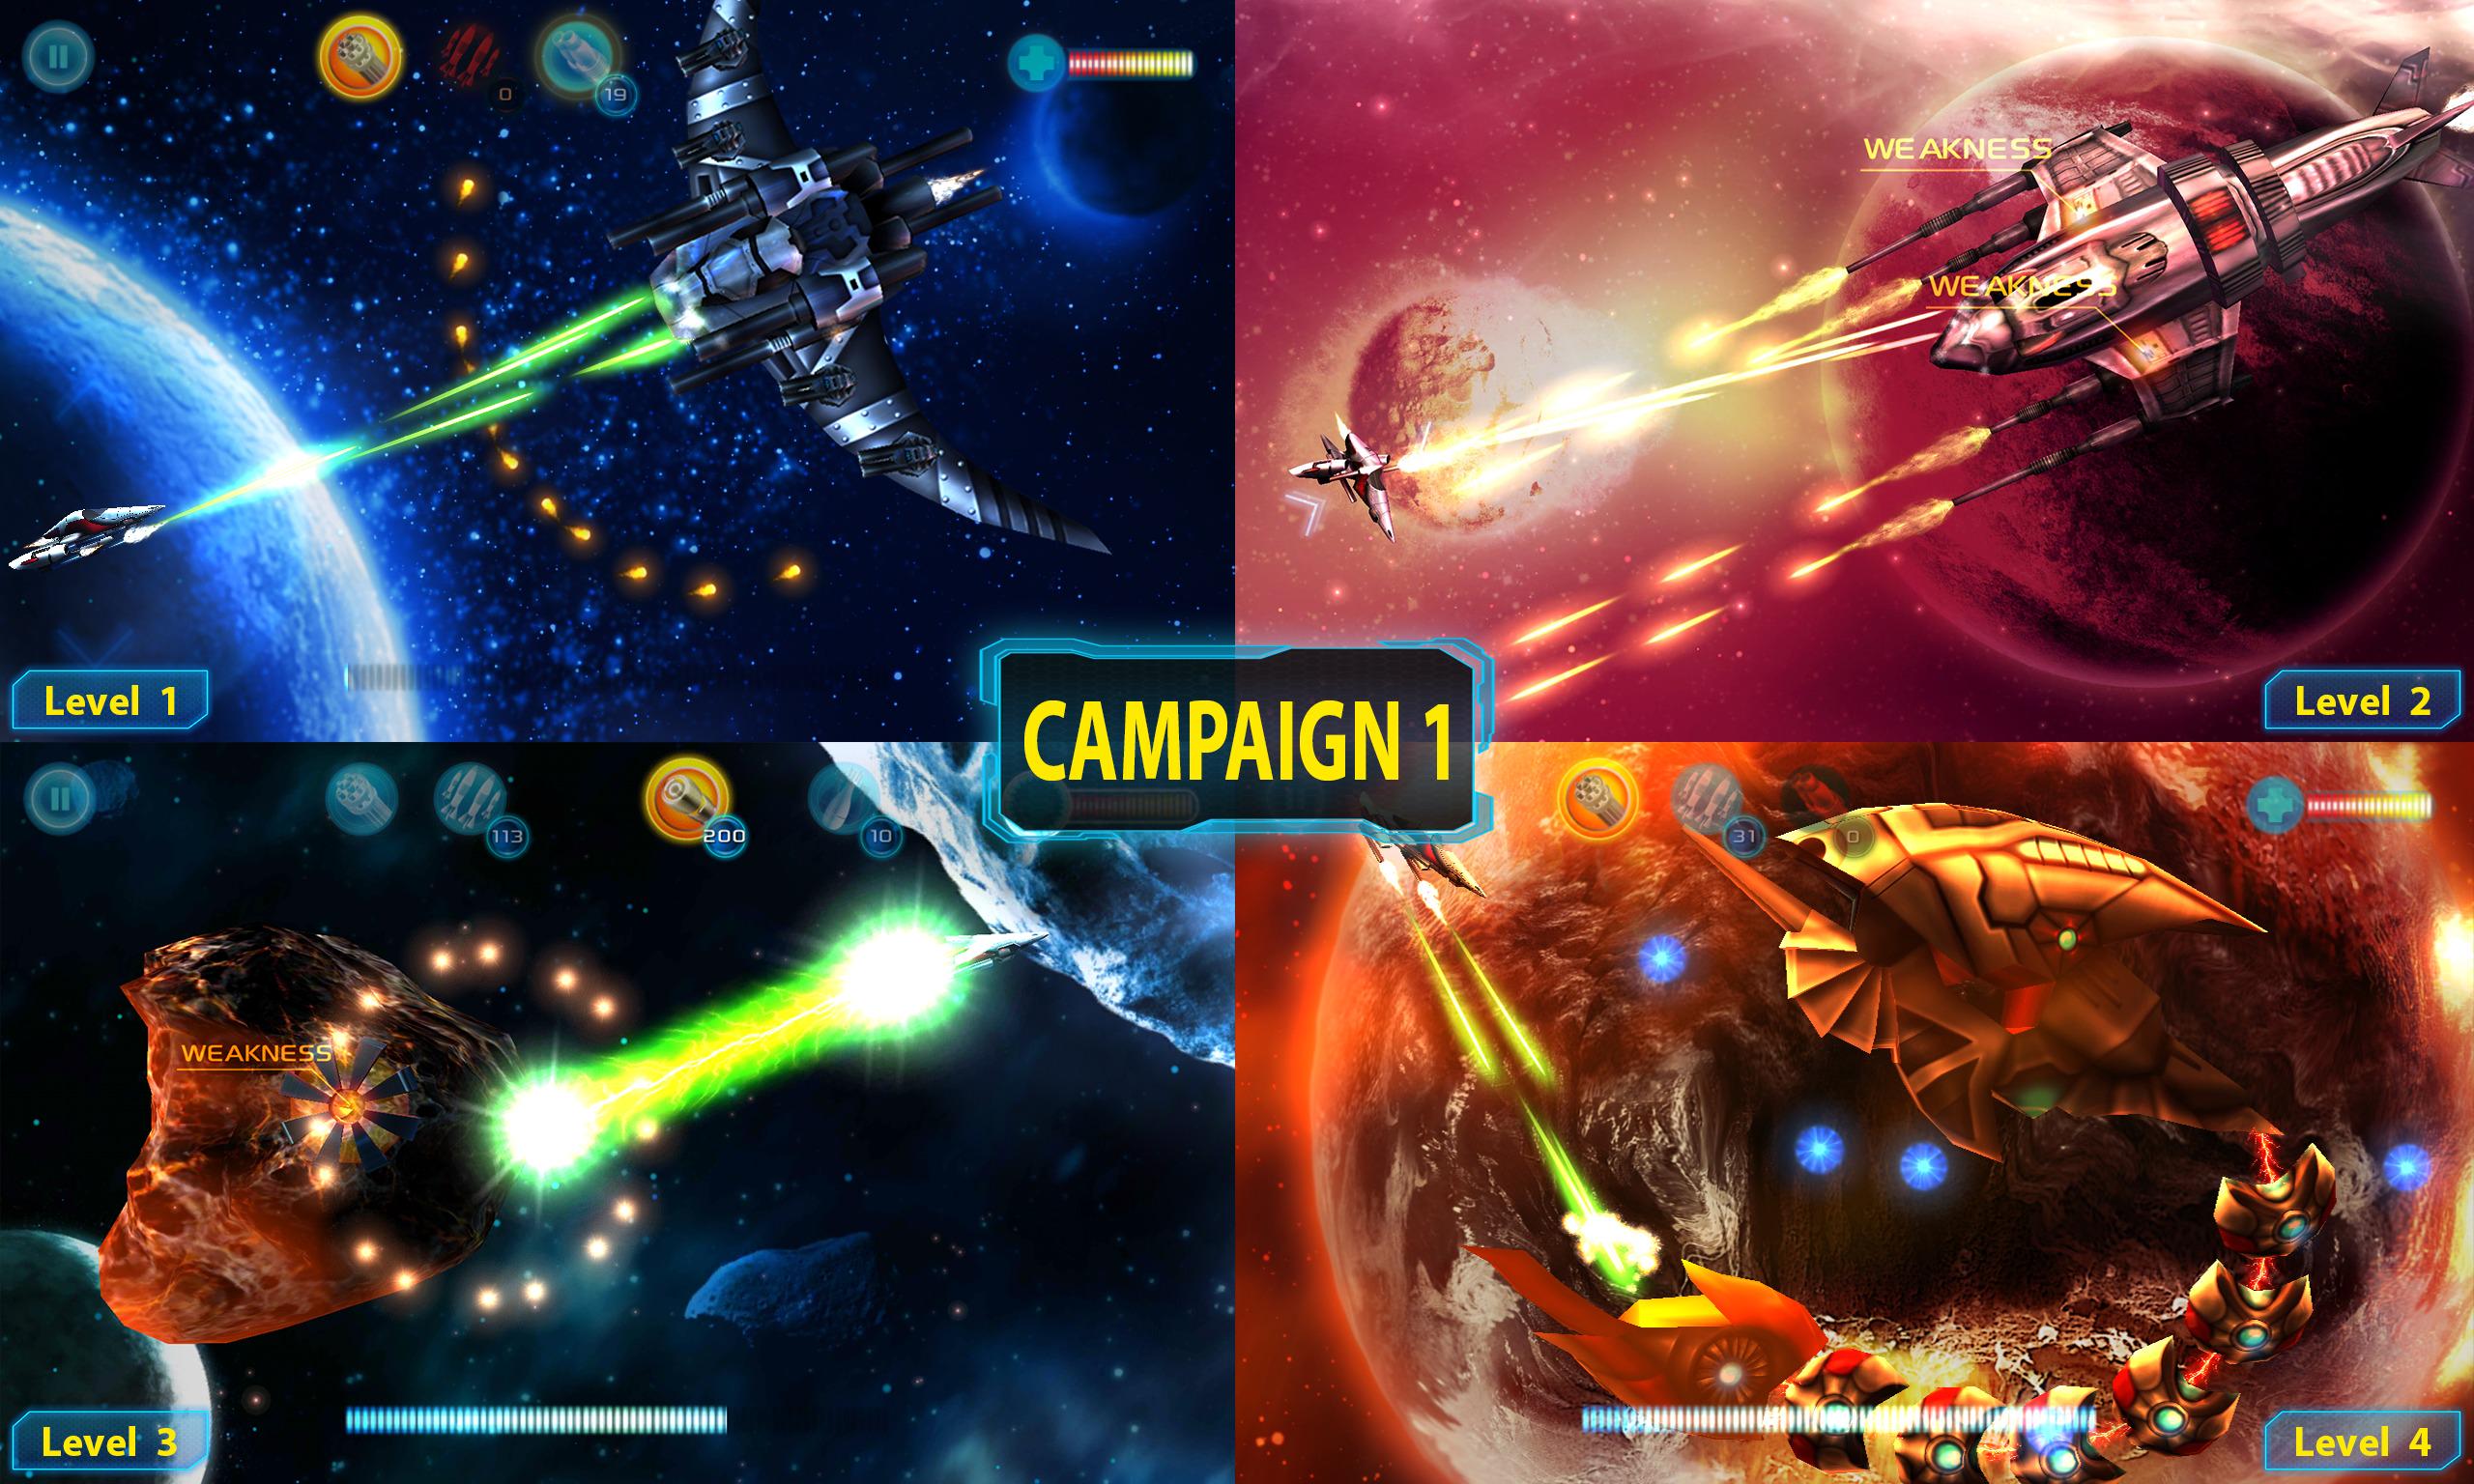 Funkoi Games - Alpha Zero third campaign is available nowDownload it,  upgrade it and have fun.